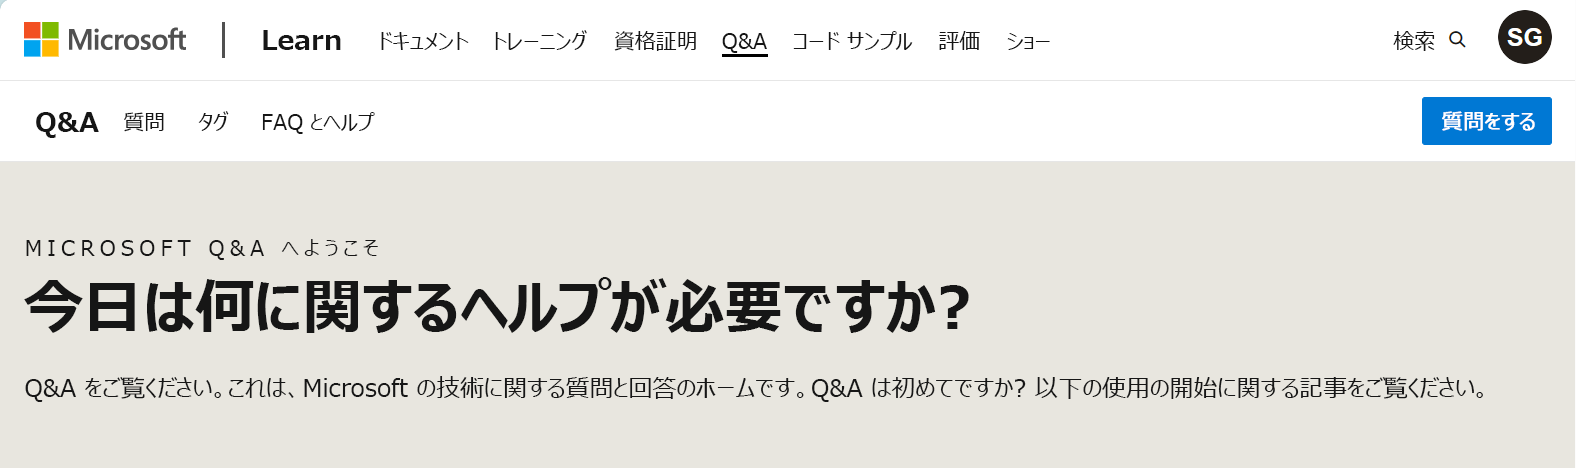 Screenshot of the home page of Microsoft Q&A.